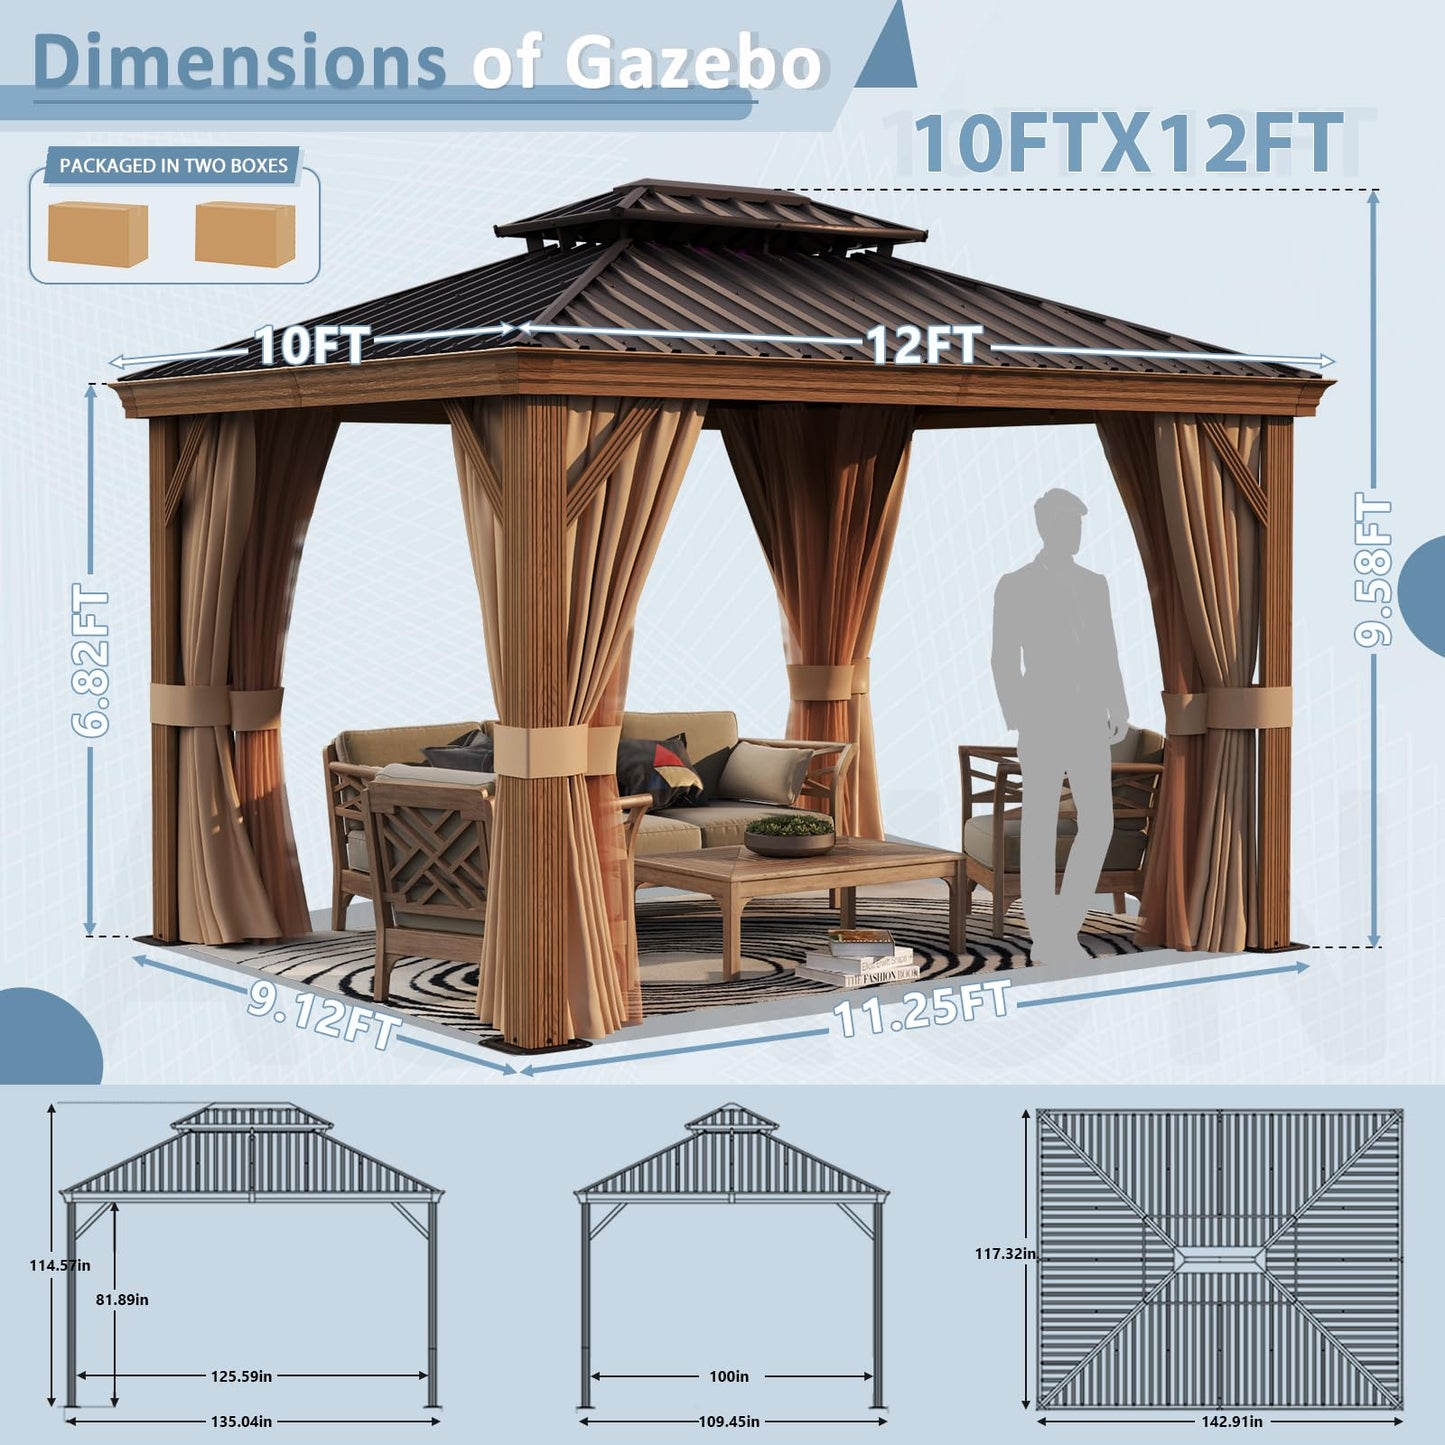 Aoxun 10' x 12' Gazebo, Wooden Finish Coated Aluminum Frame Canopy with Dual-Layer Galvanized Steel Hardtop Top, Outdoor Metal Pavilion with Privacy